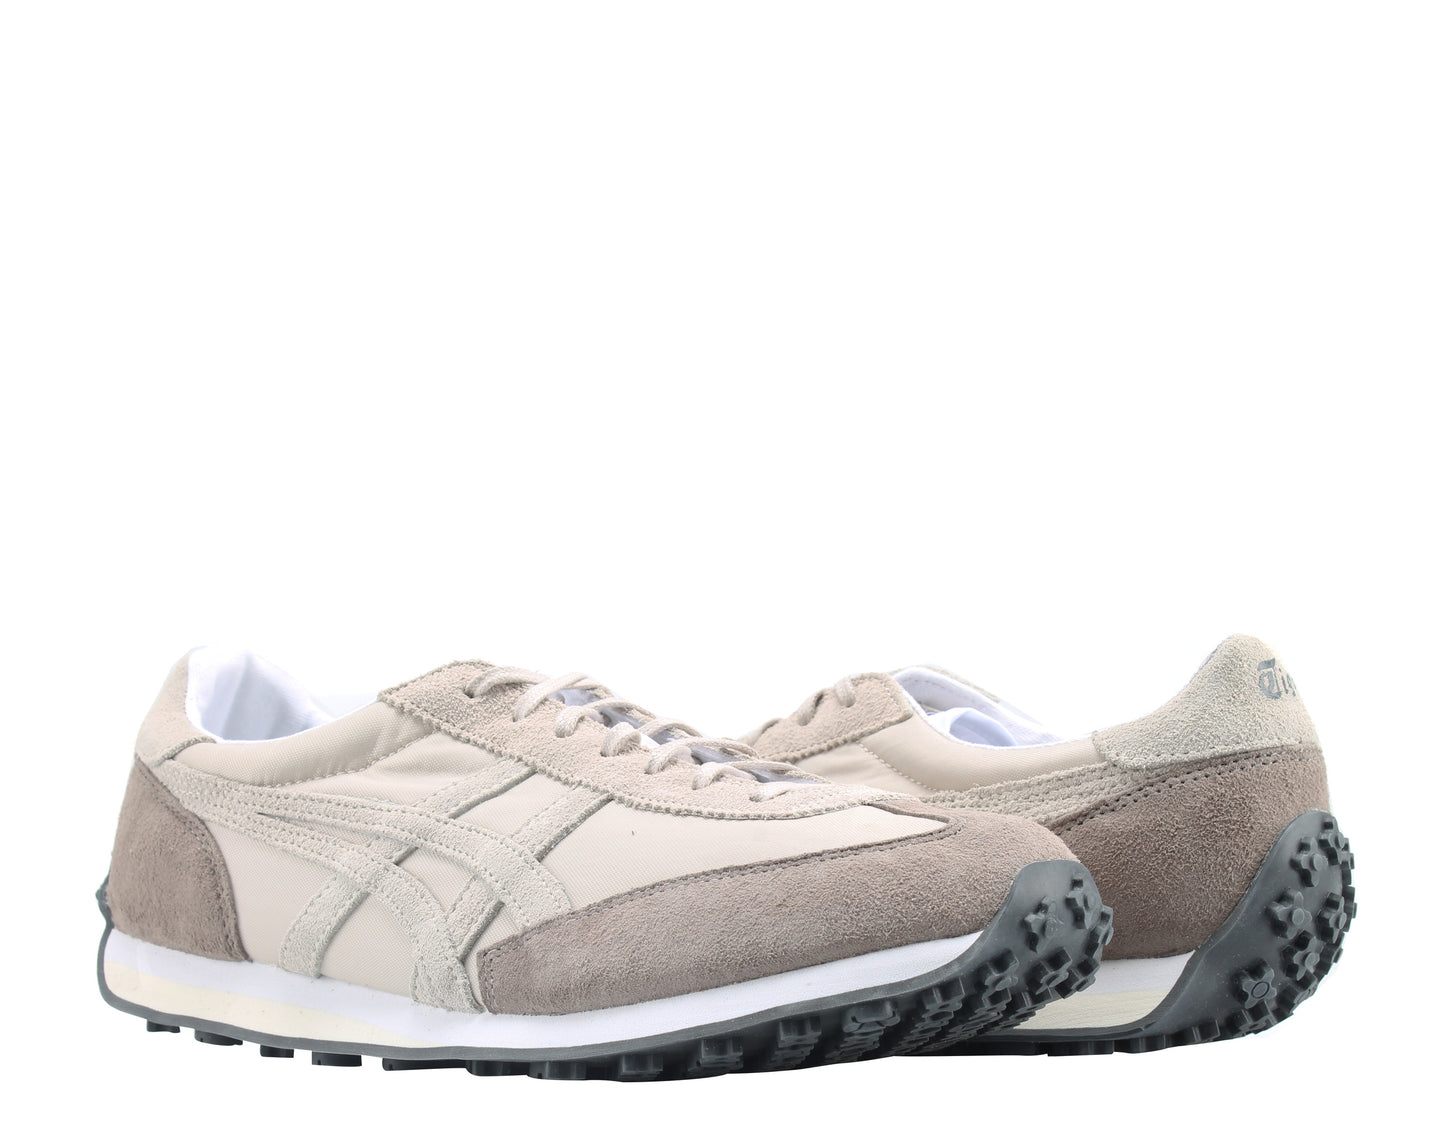 Onitsuka Tiger by Asics EDR 78 Running Shoes